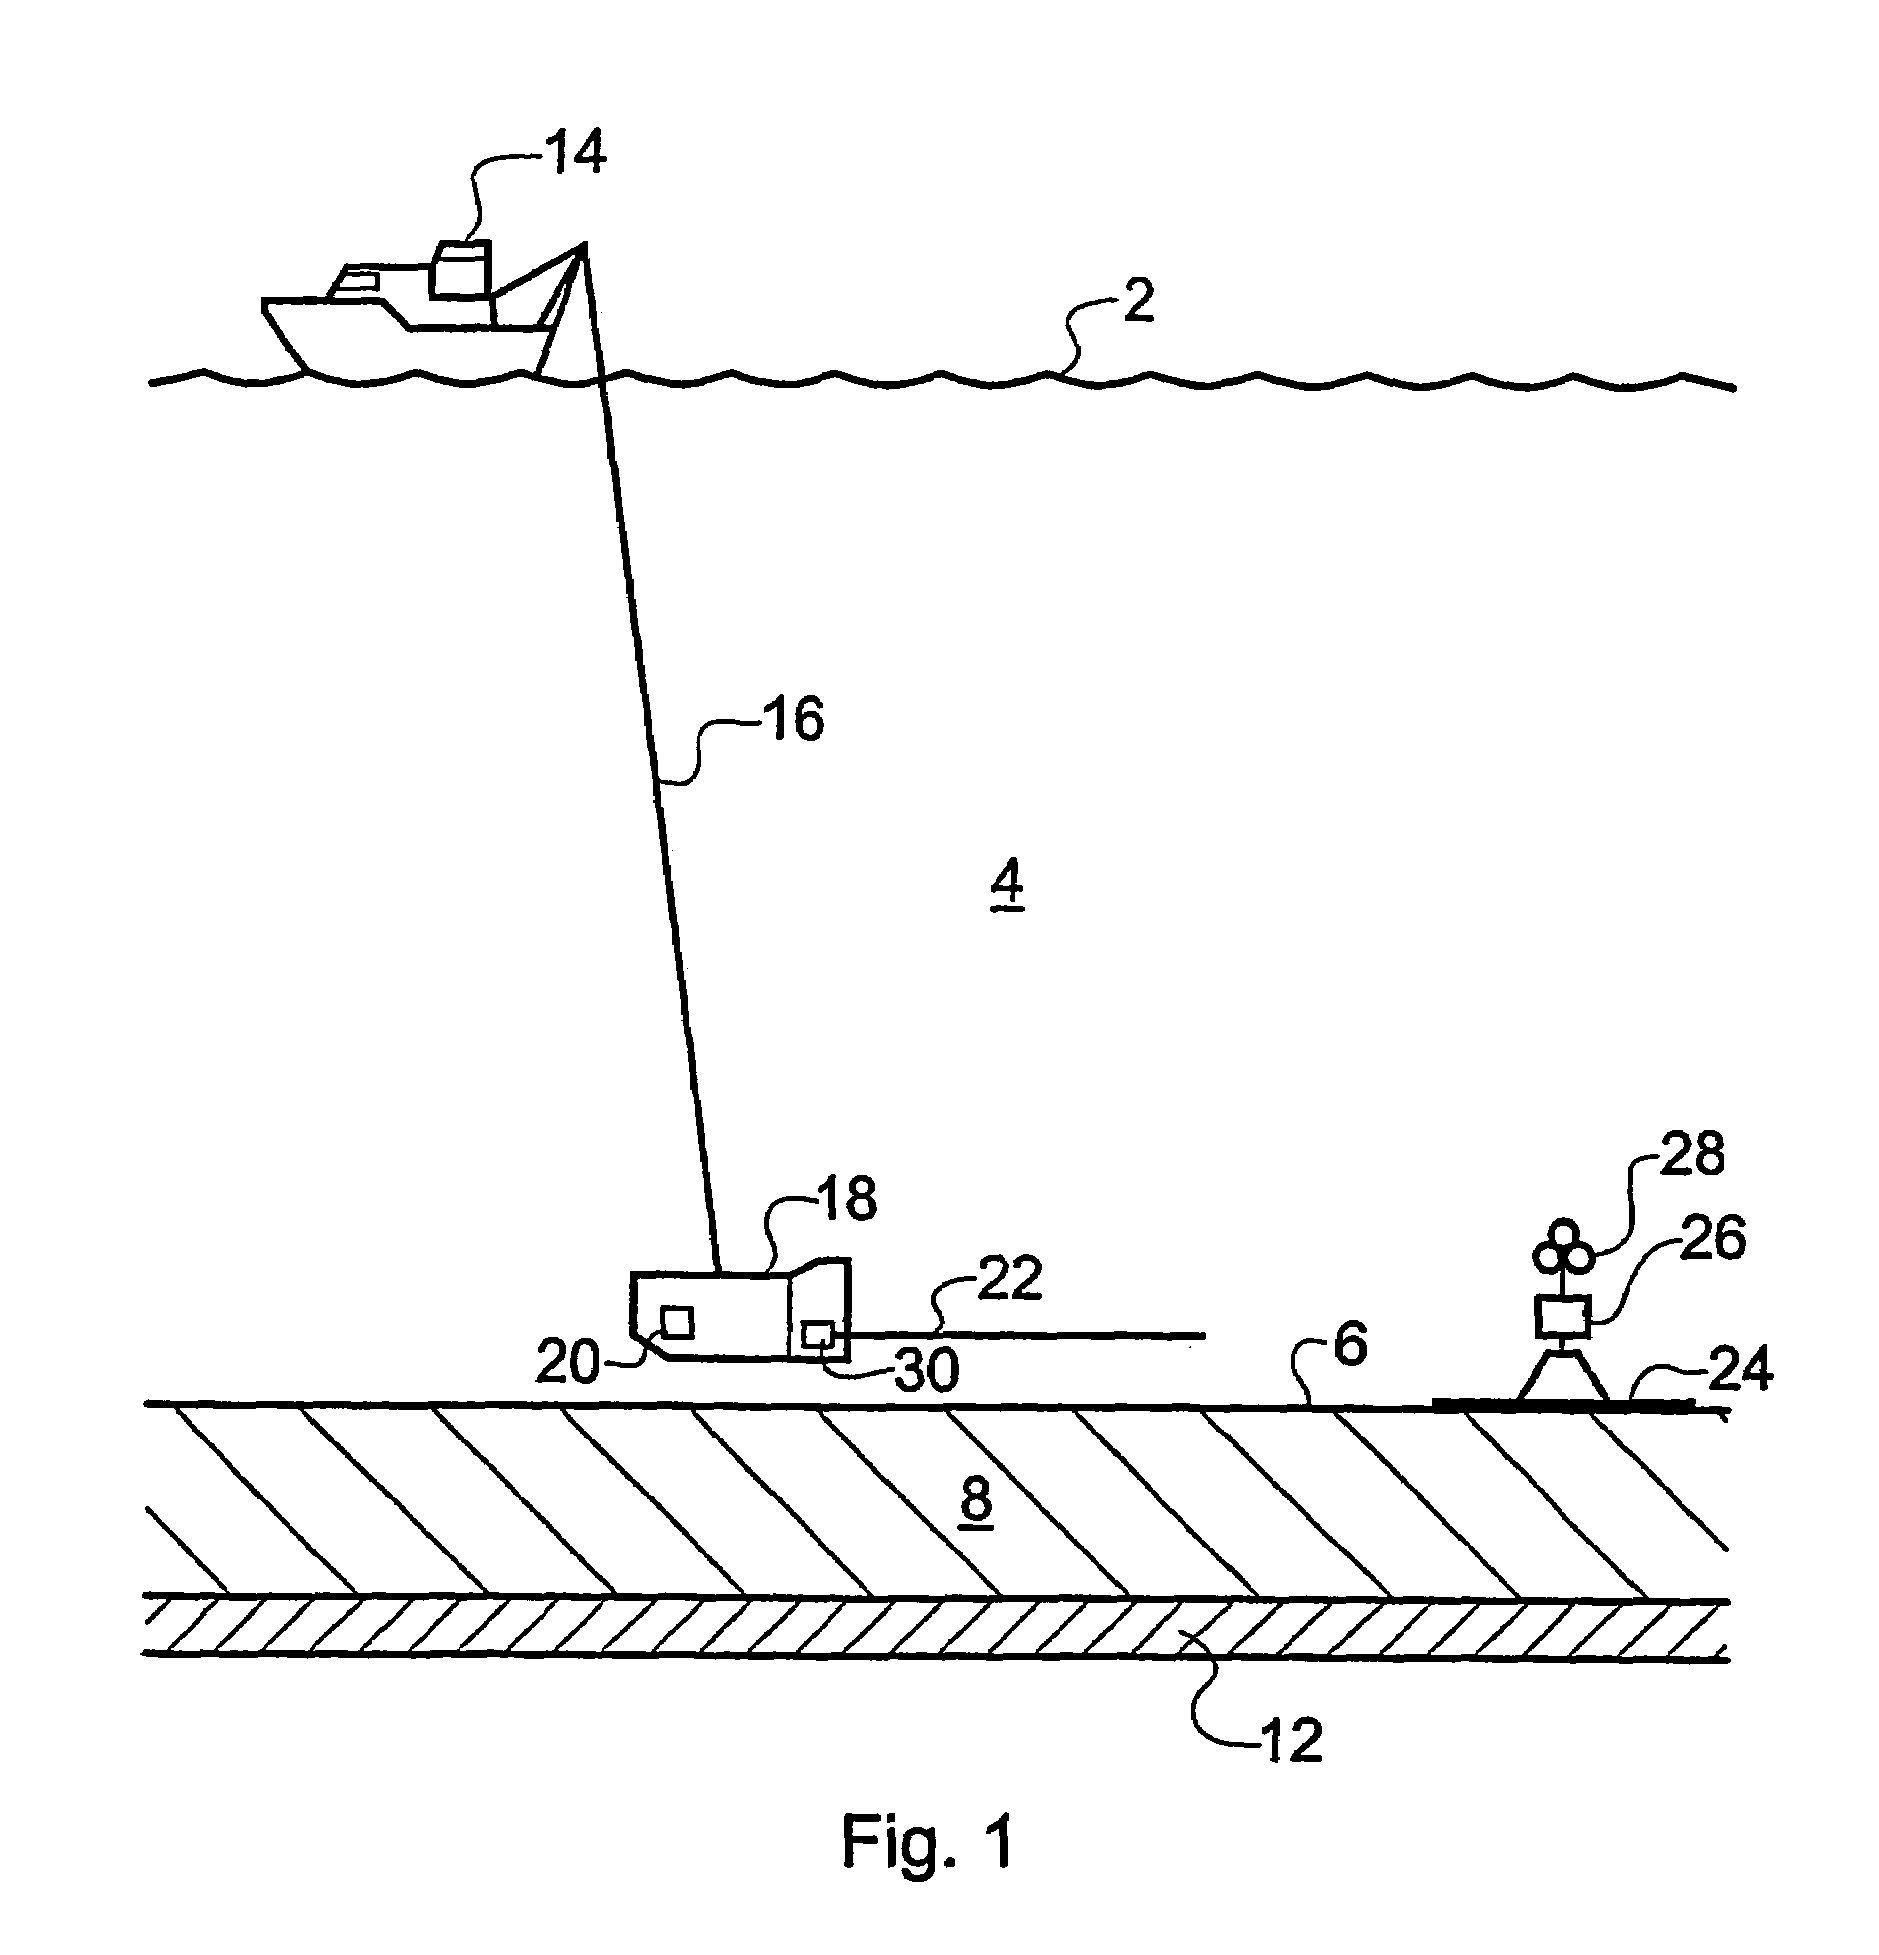 Signal generation apparatus and method for seafloor electromagnetic exploration